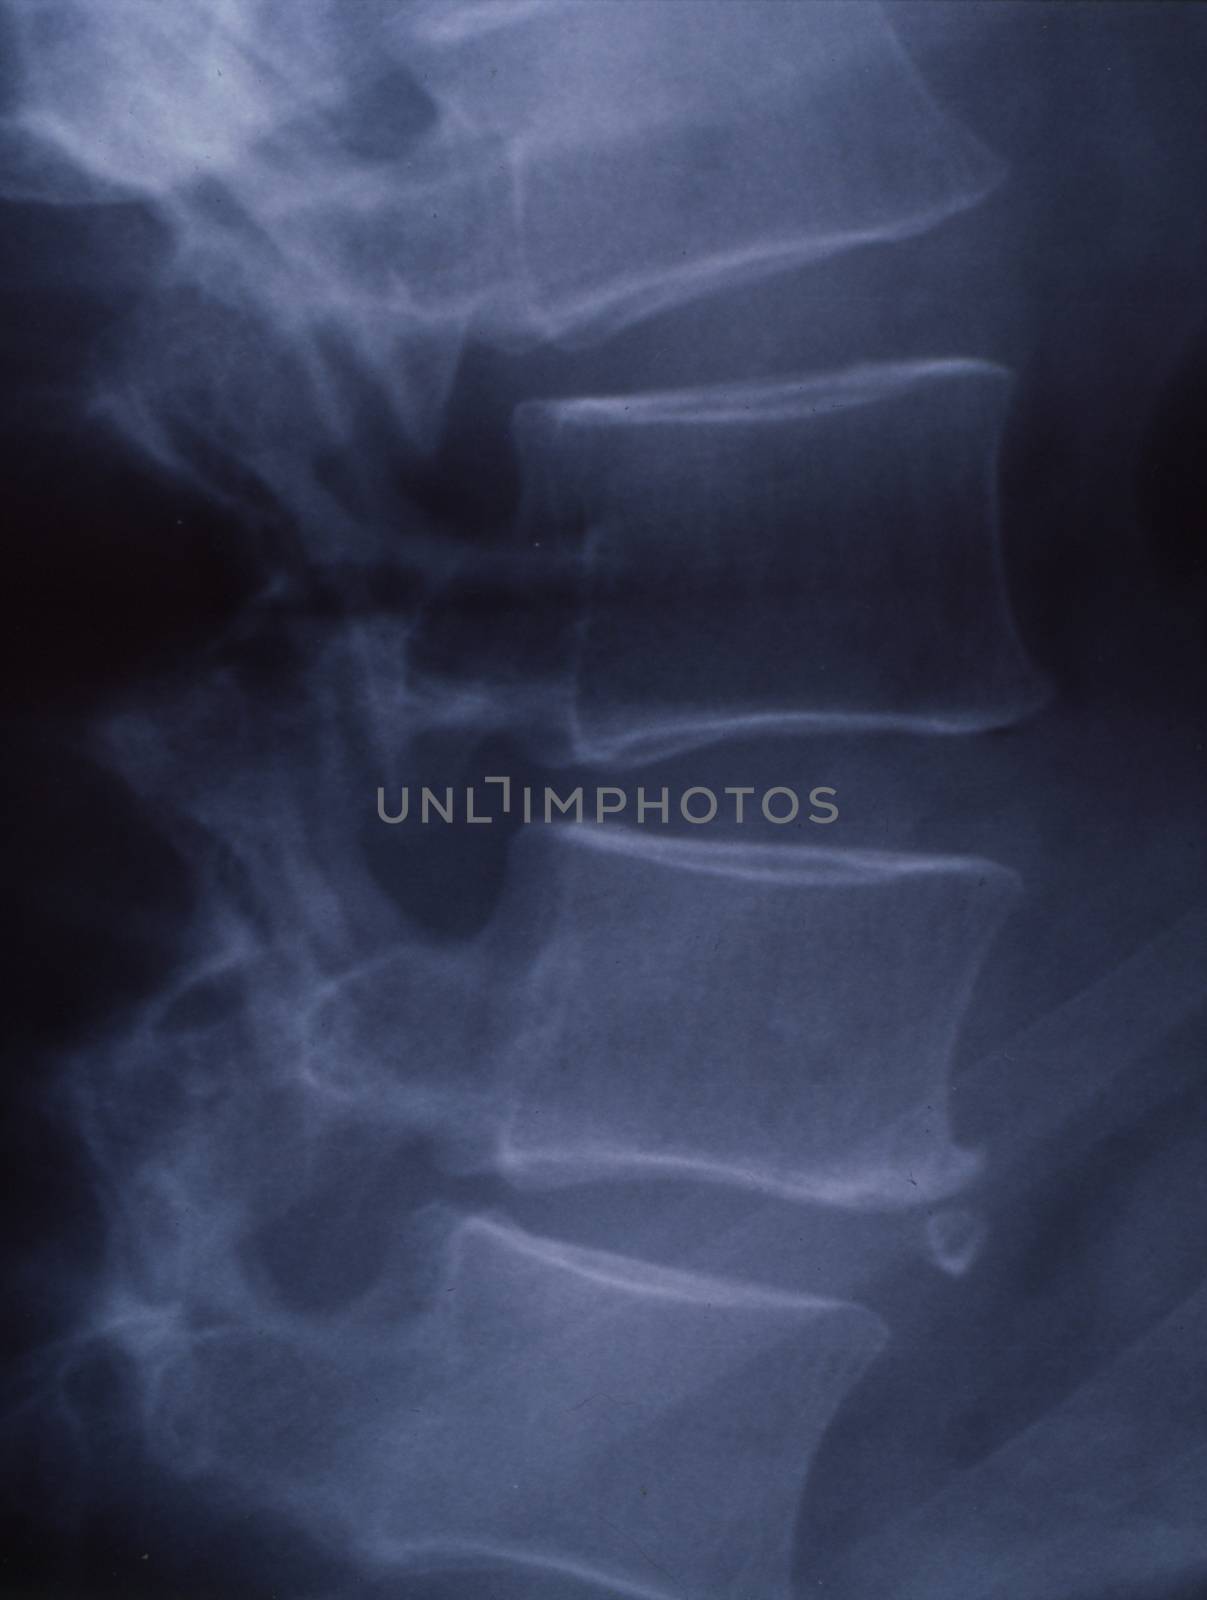 X-ray image of the spine for medical diagnosis by Dr-Lange